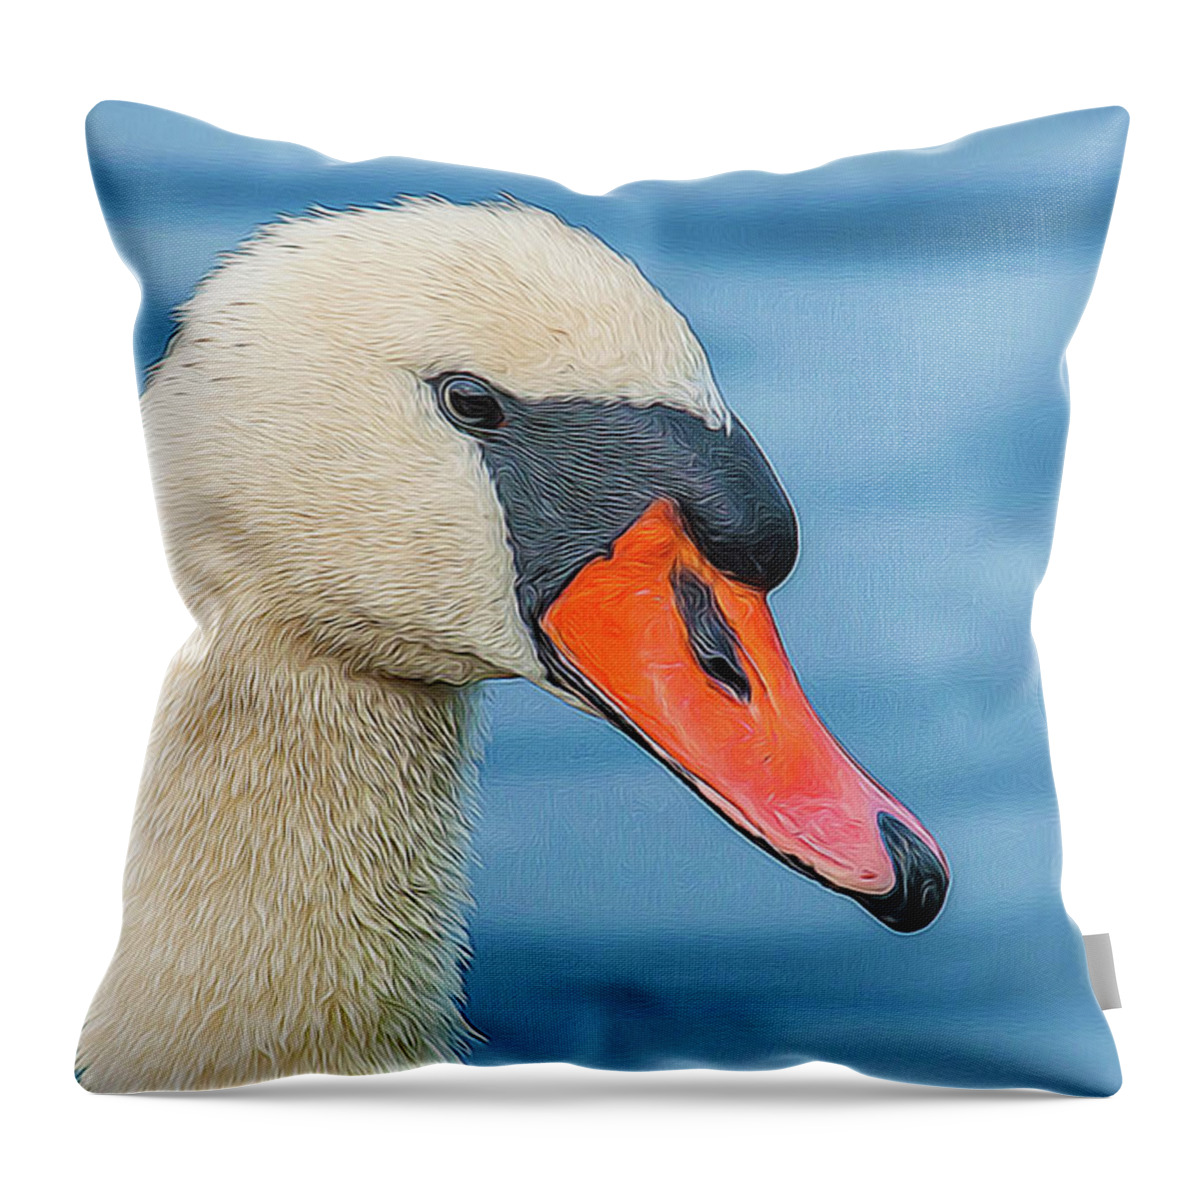 Swan Throw Pillow featuring the photograph Swan Portrait by Cathy Kovarik